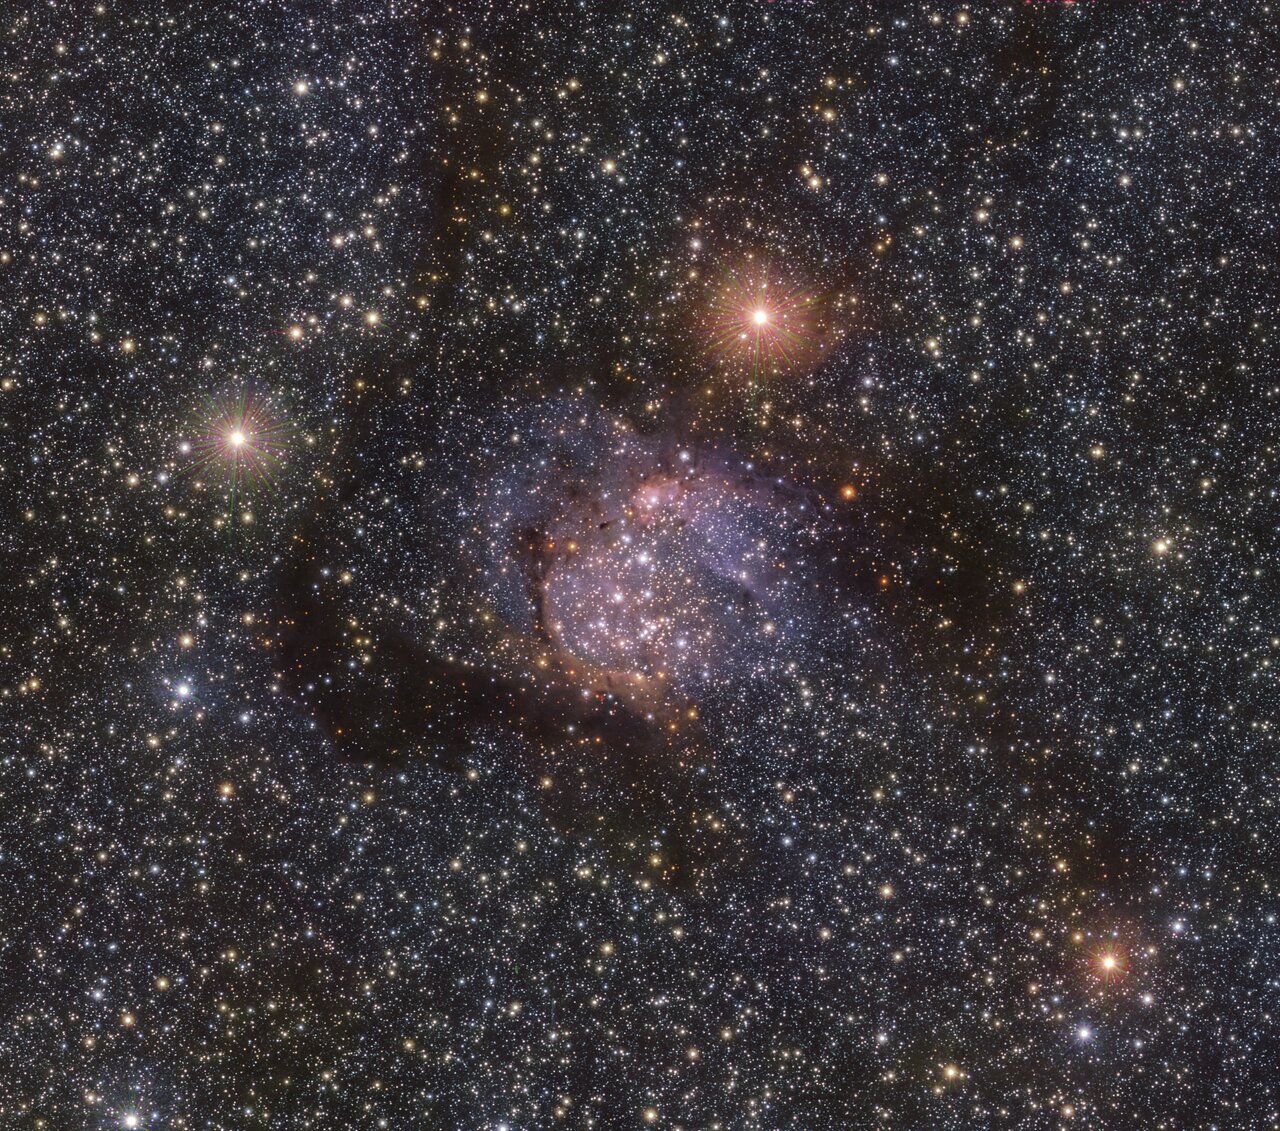 This image of the spectacular Sh2-54 nebula was taken in infrared light using ESO’s VISTA telescope at Paranal Observatory in Chile. The clouds of dust and gas that are normally obvious in visible light are less evident here, and in this light we can see the light of the stars behind the nebulae now piercing through.